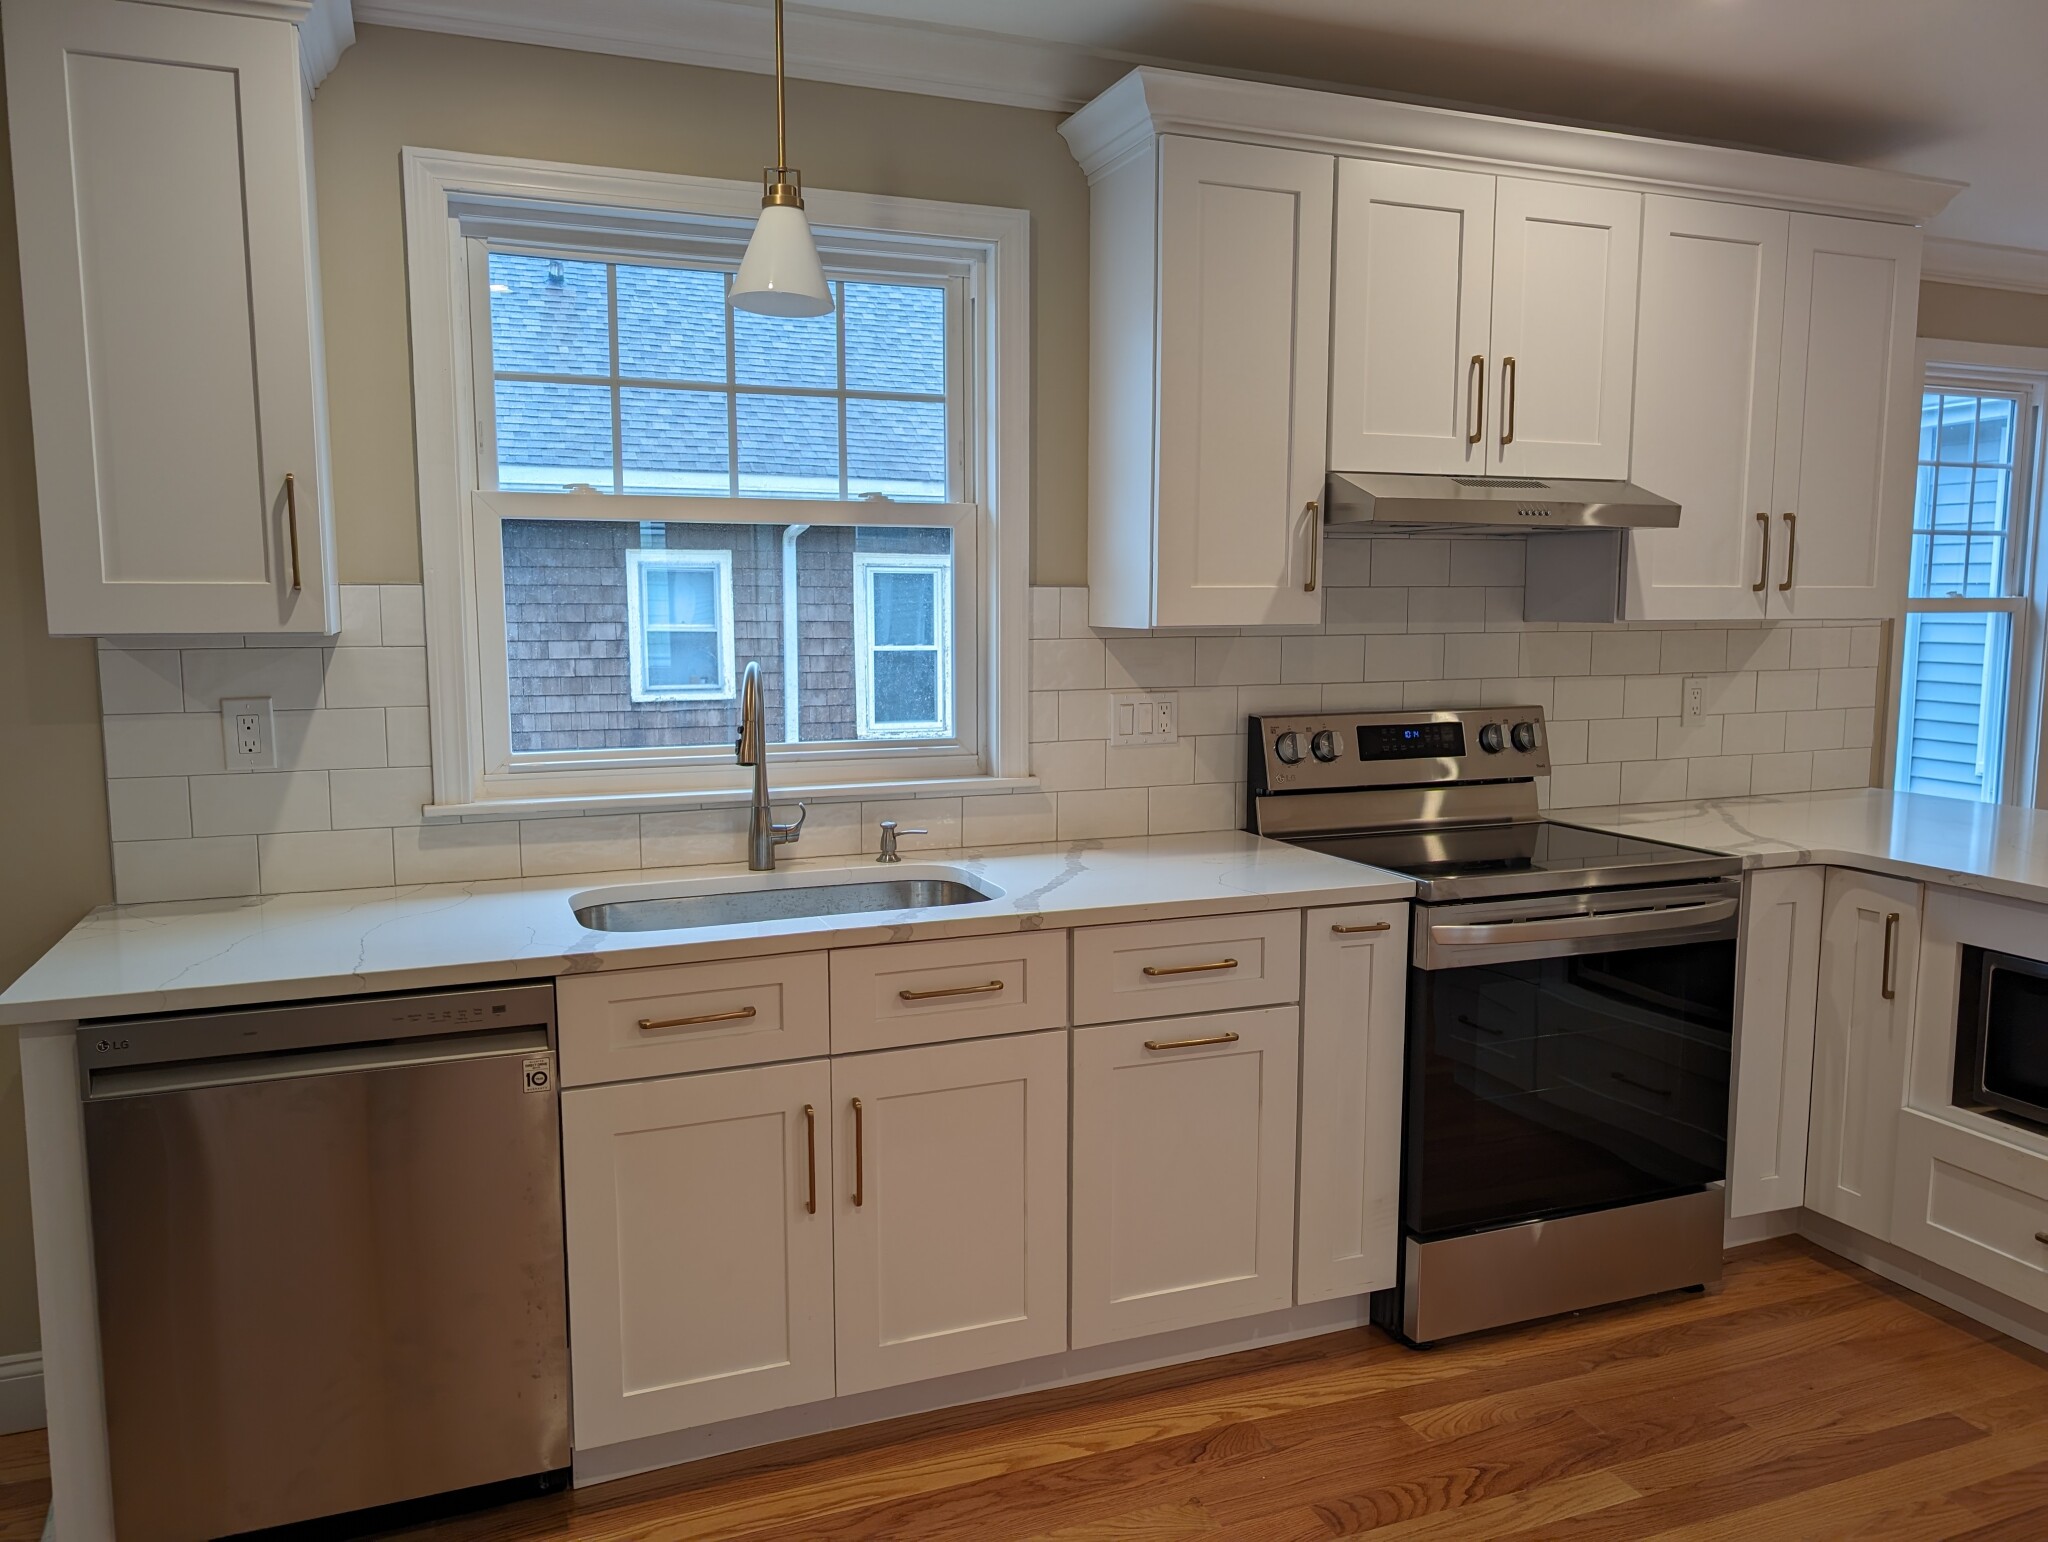 Photos of apartment on Warwick Rd.,Belmont MA 02478